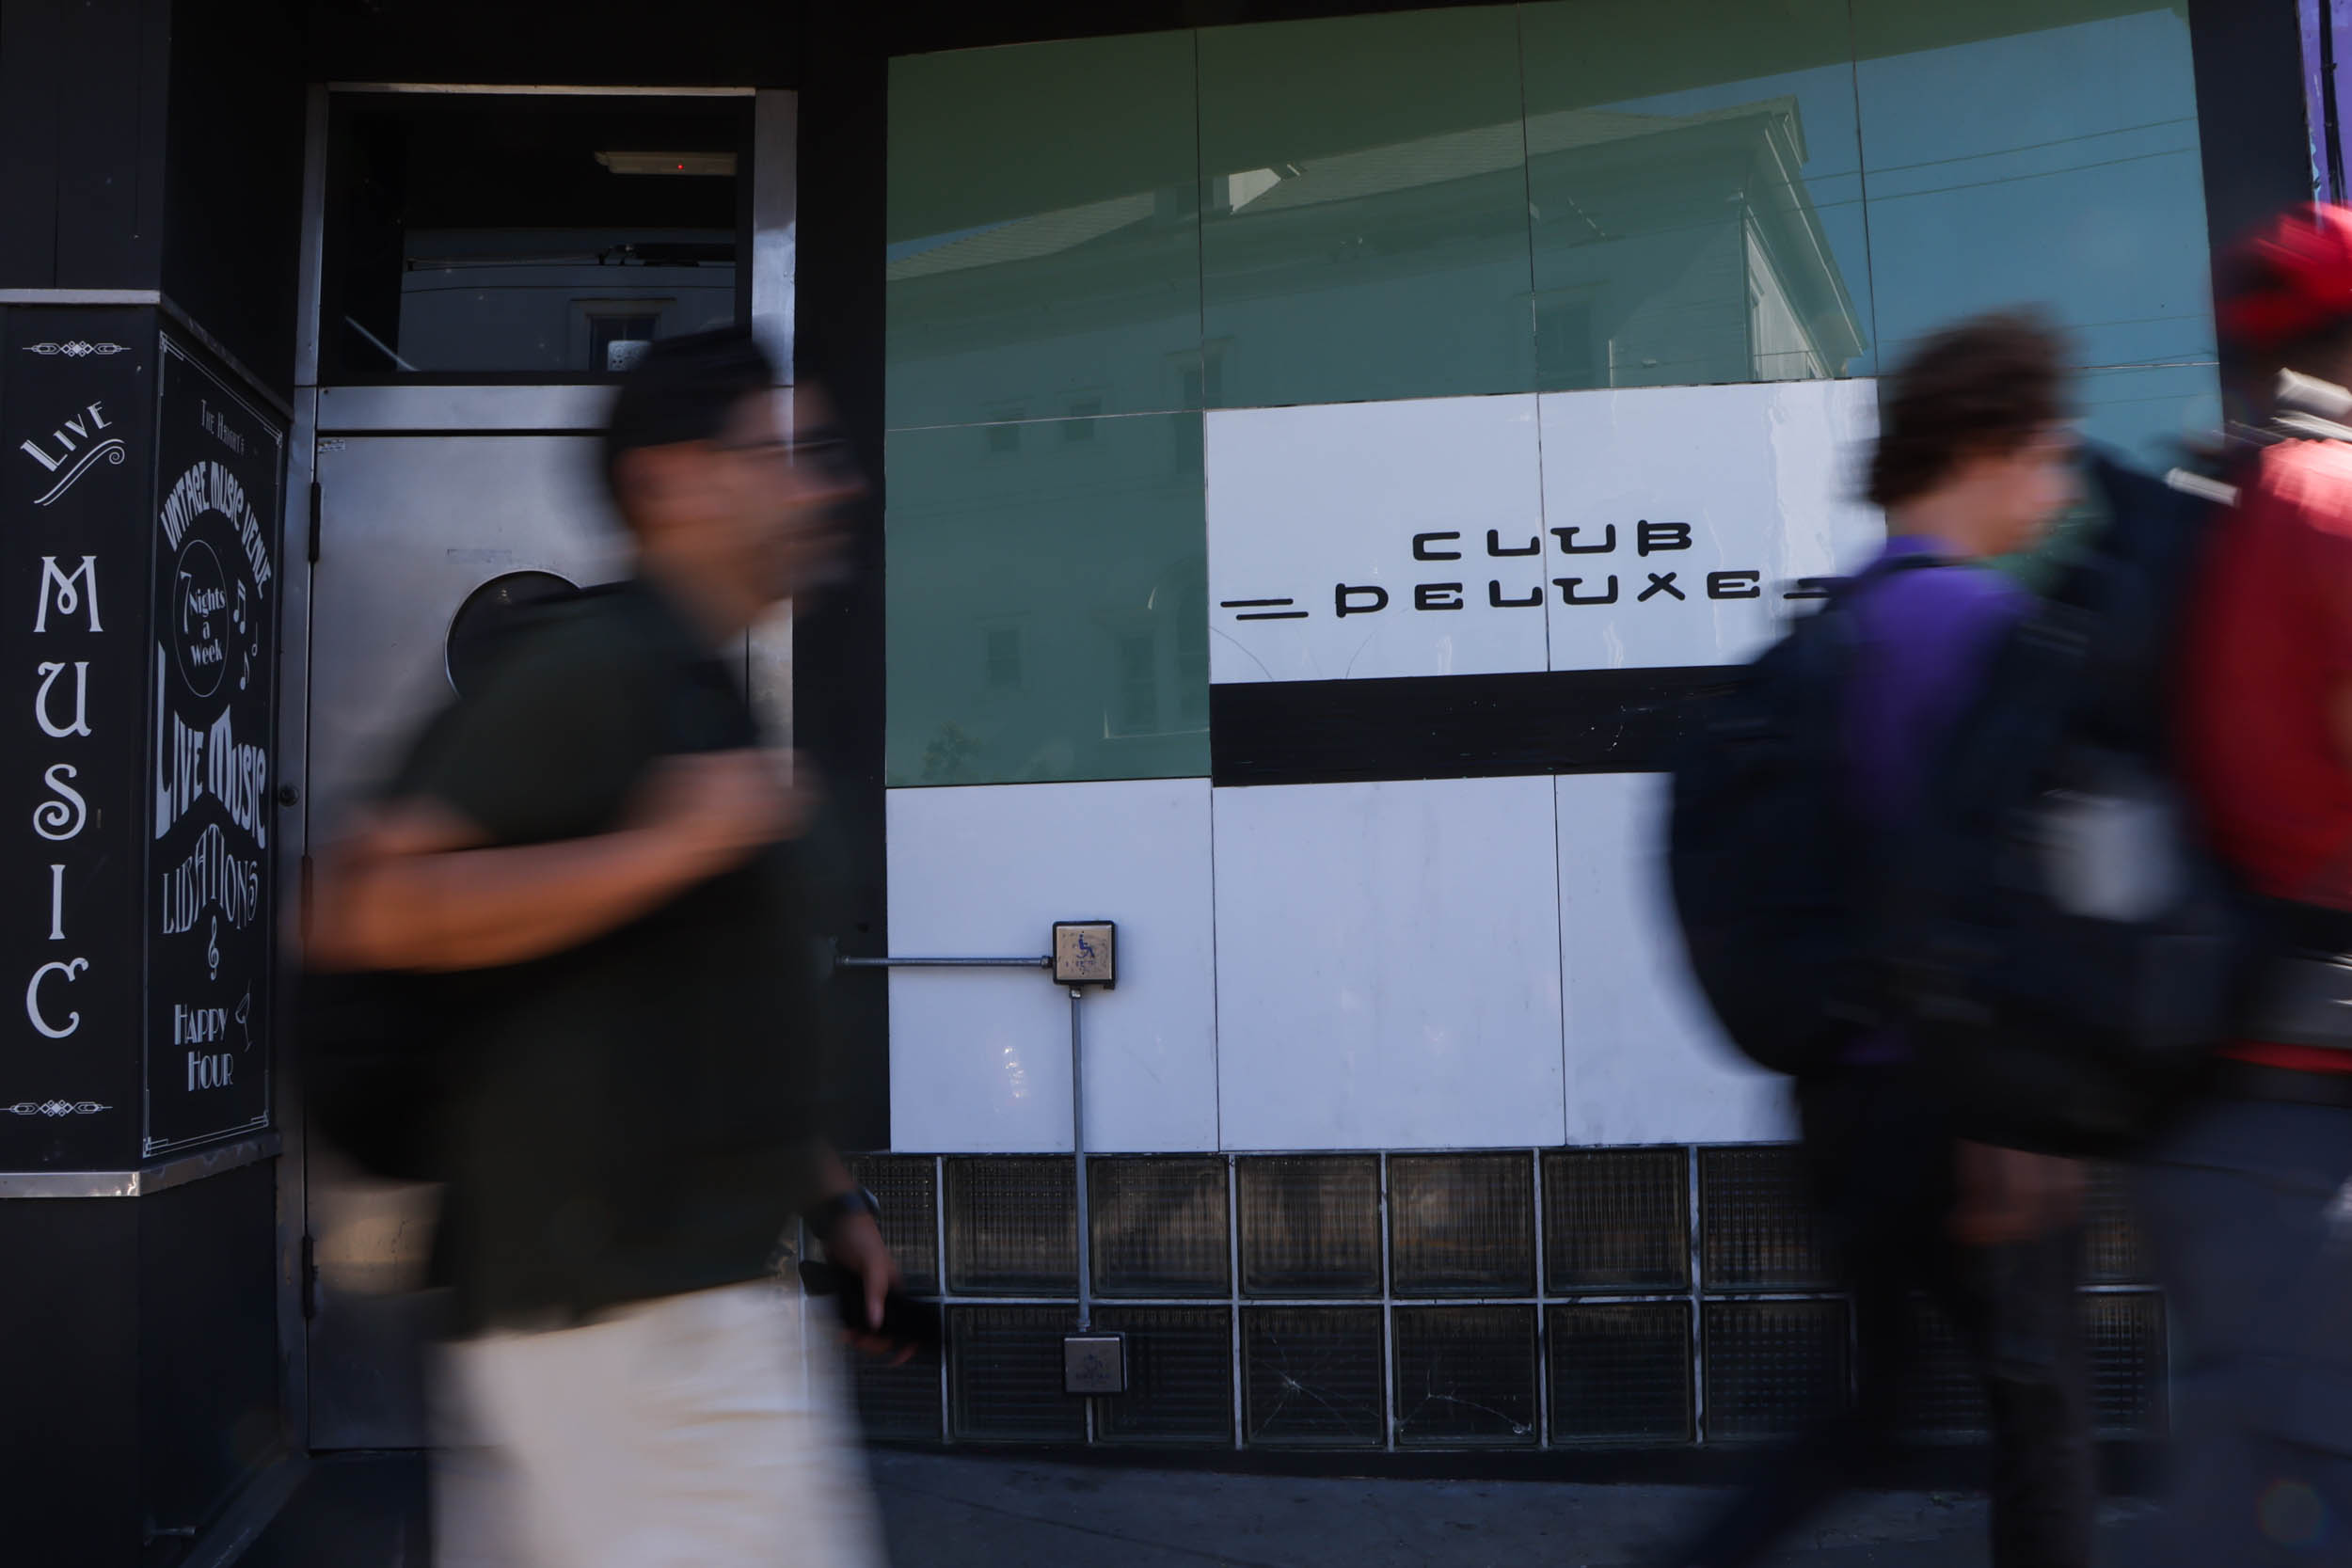 Club Deluxe Owner Says the Venue Will Close, Landlord Pushes Back